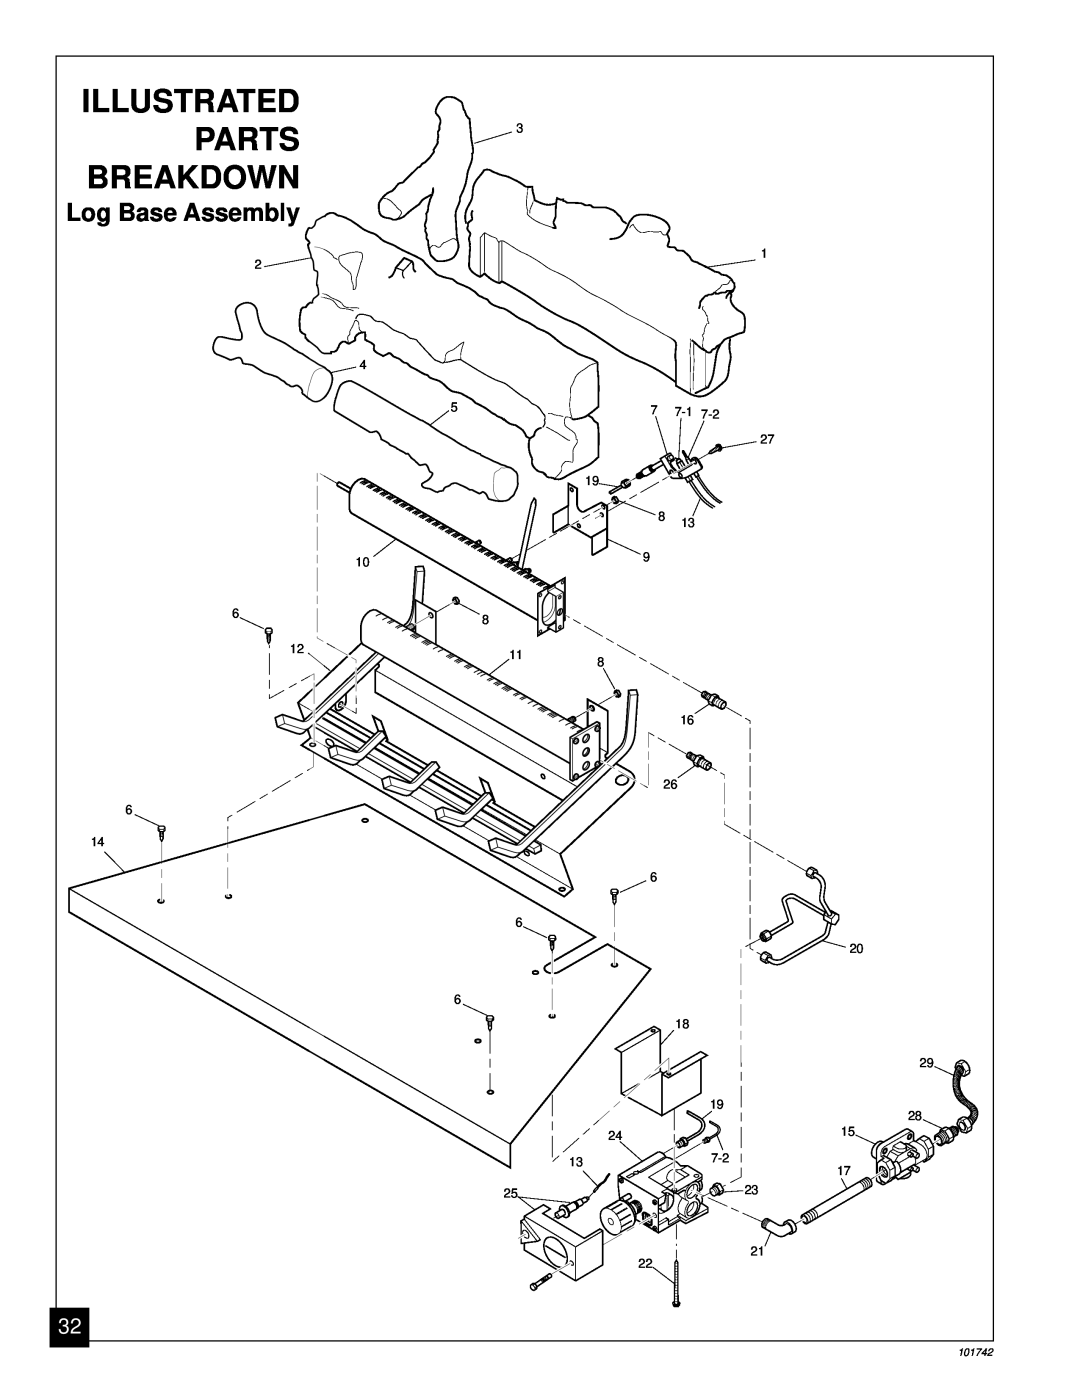 Desa UNVENTED (VENT-FREE) NATURAL GAS FIREPLACE installation manual Illustrated, Parts, Breakdown, Log Base Assembly 